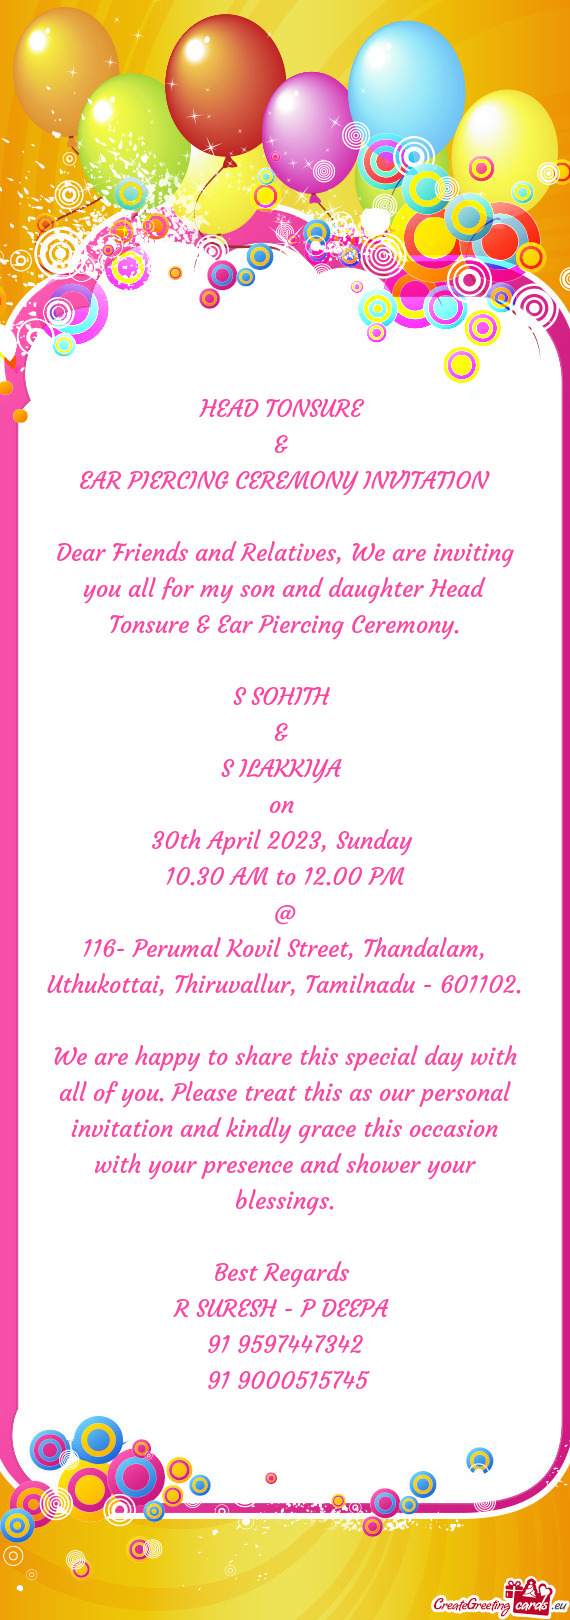 Dear Friends and Relatives, We are inviting you all for my son and daughter Head Tonsure & Ear Pierc